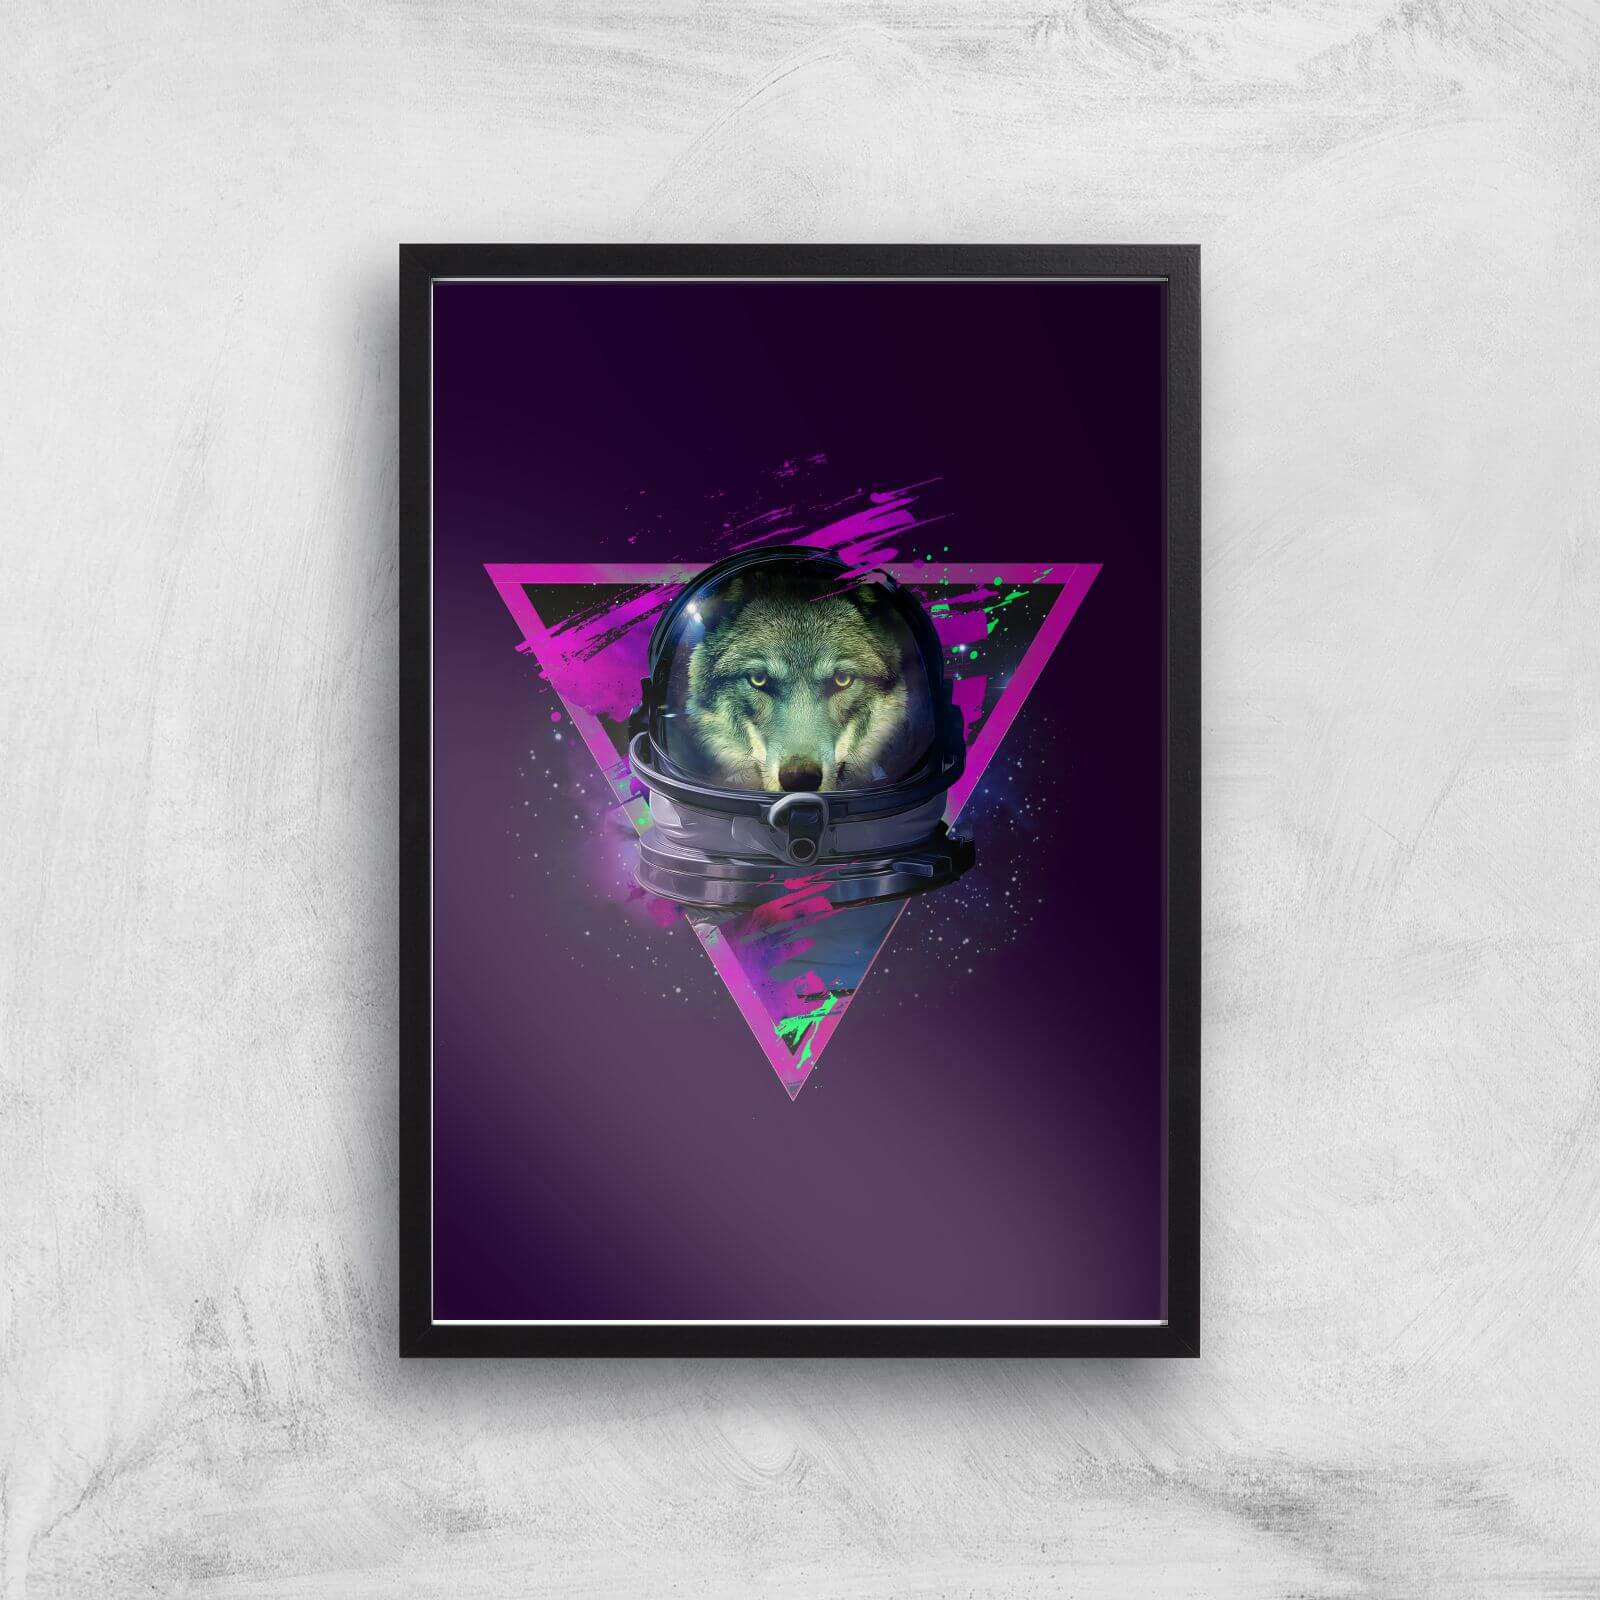 Lonely Astronaut Giclee Art Print - A2 - Black Frame